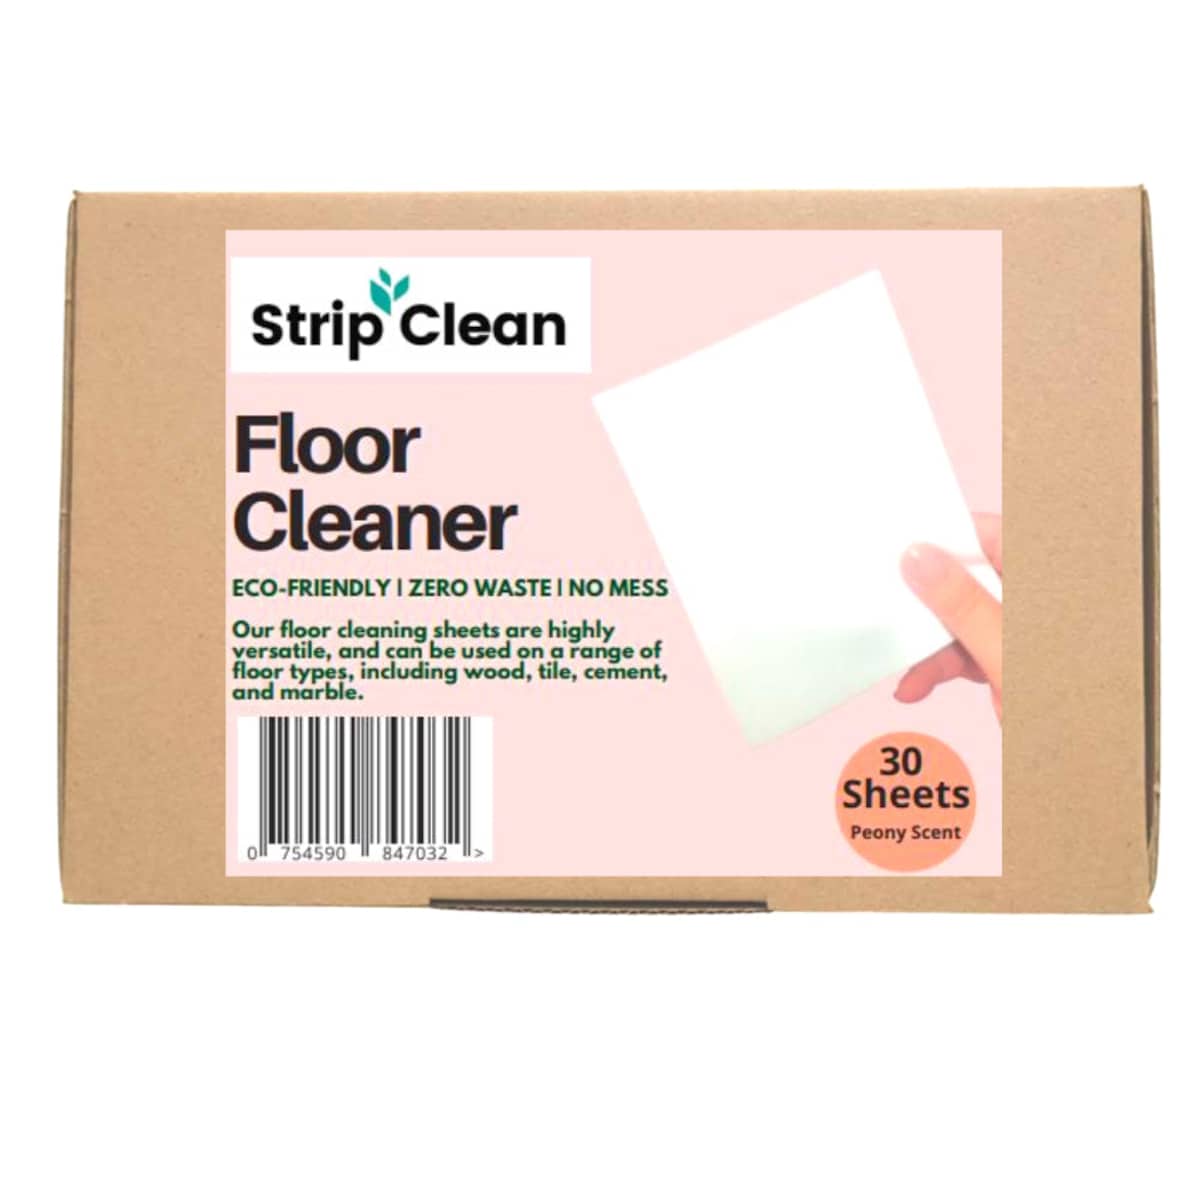 Strip Clean Floor Cleaner Sheets 30 Sheets